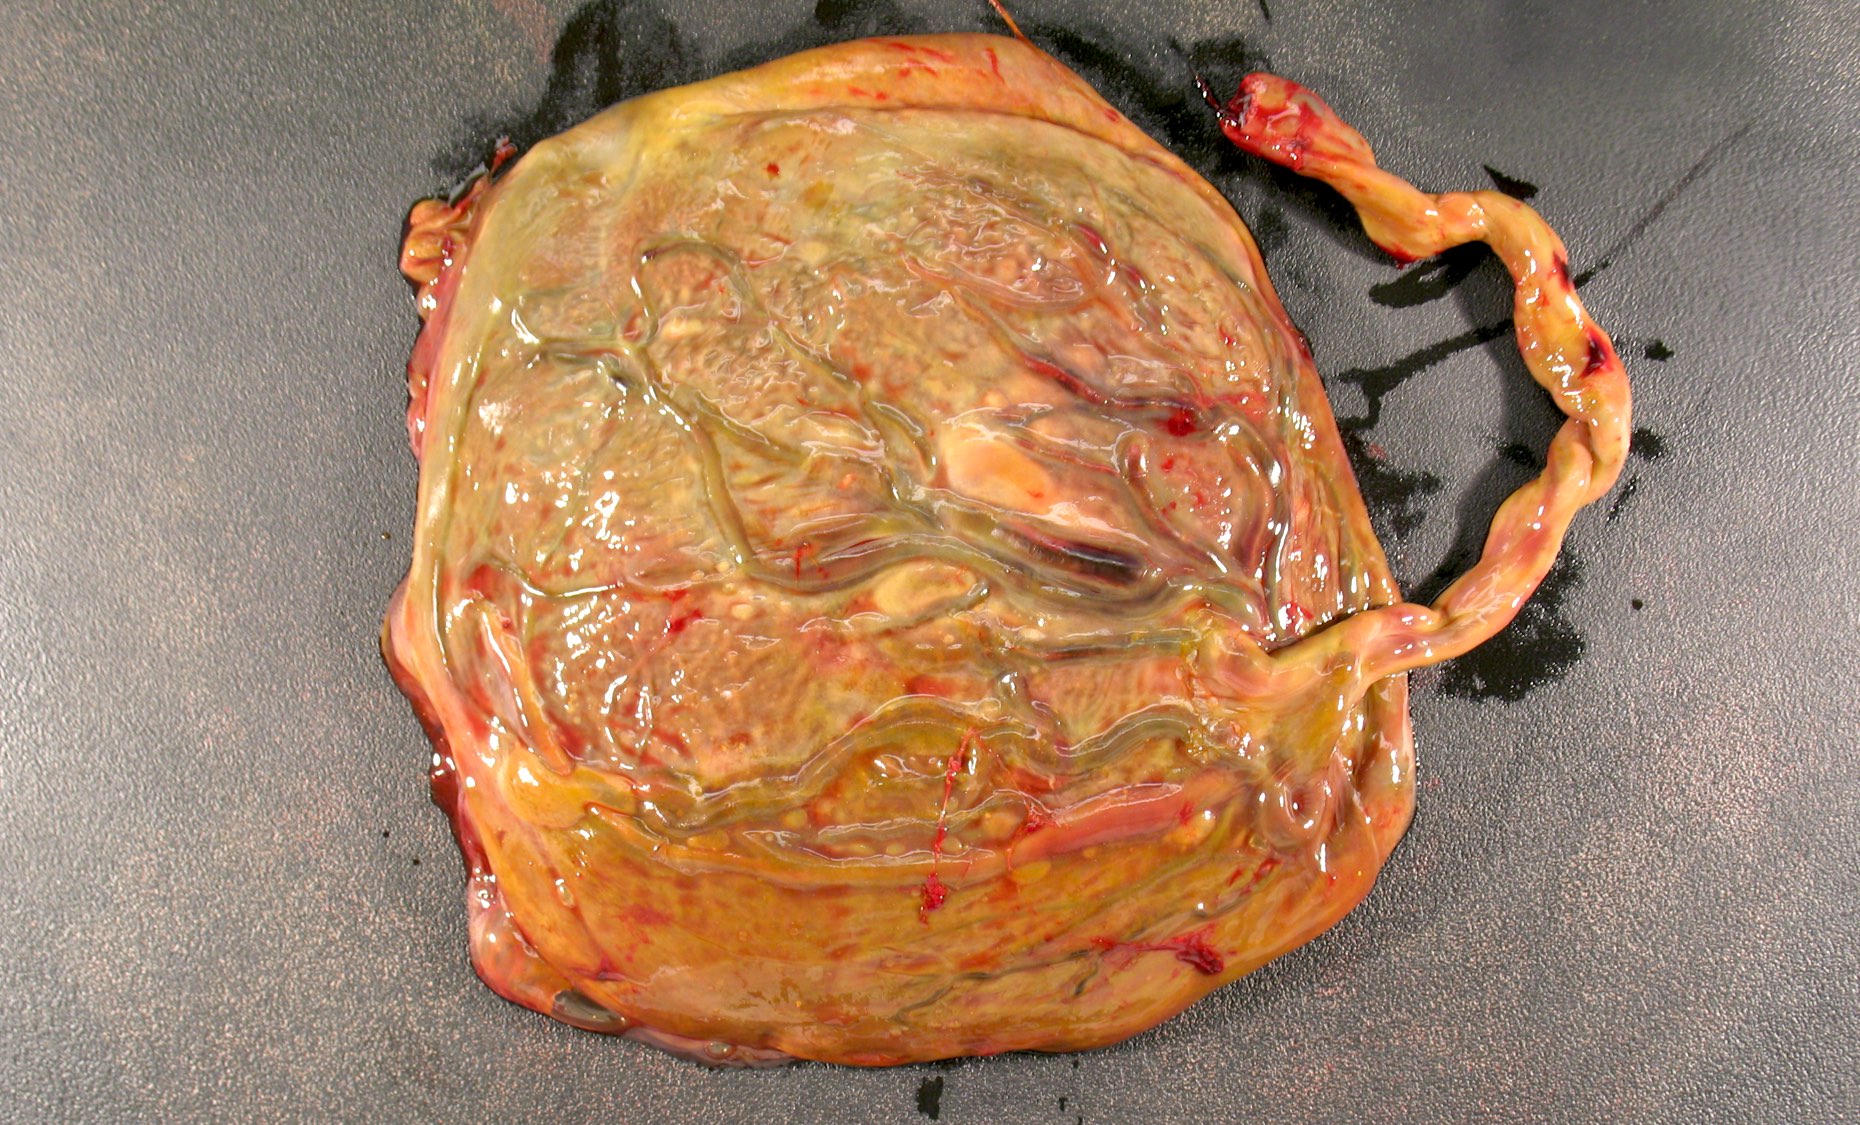 Umbilical cord and fetal surface discoloration